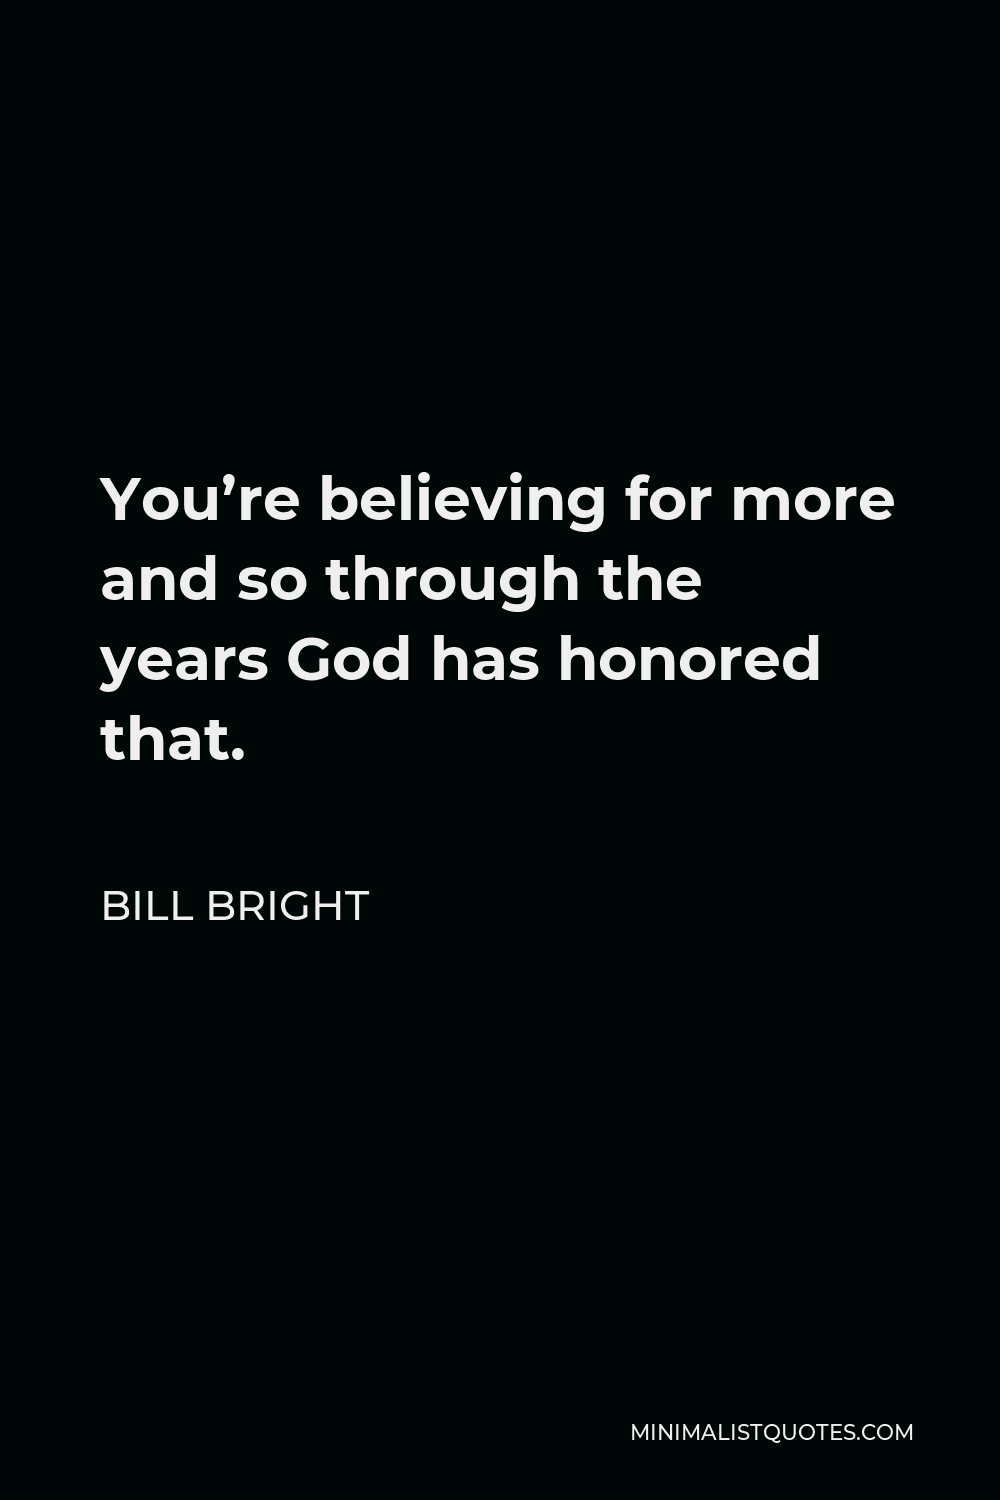 Bill Bright Quote - You’re believing for more and so through the years God has honored that.